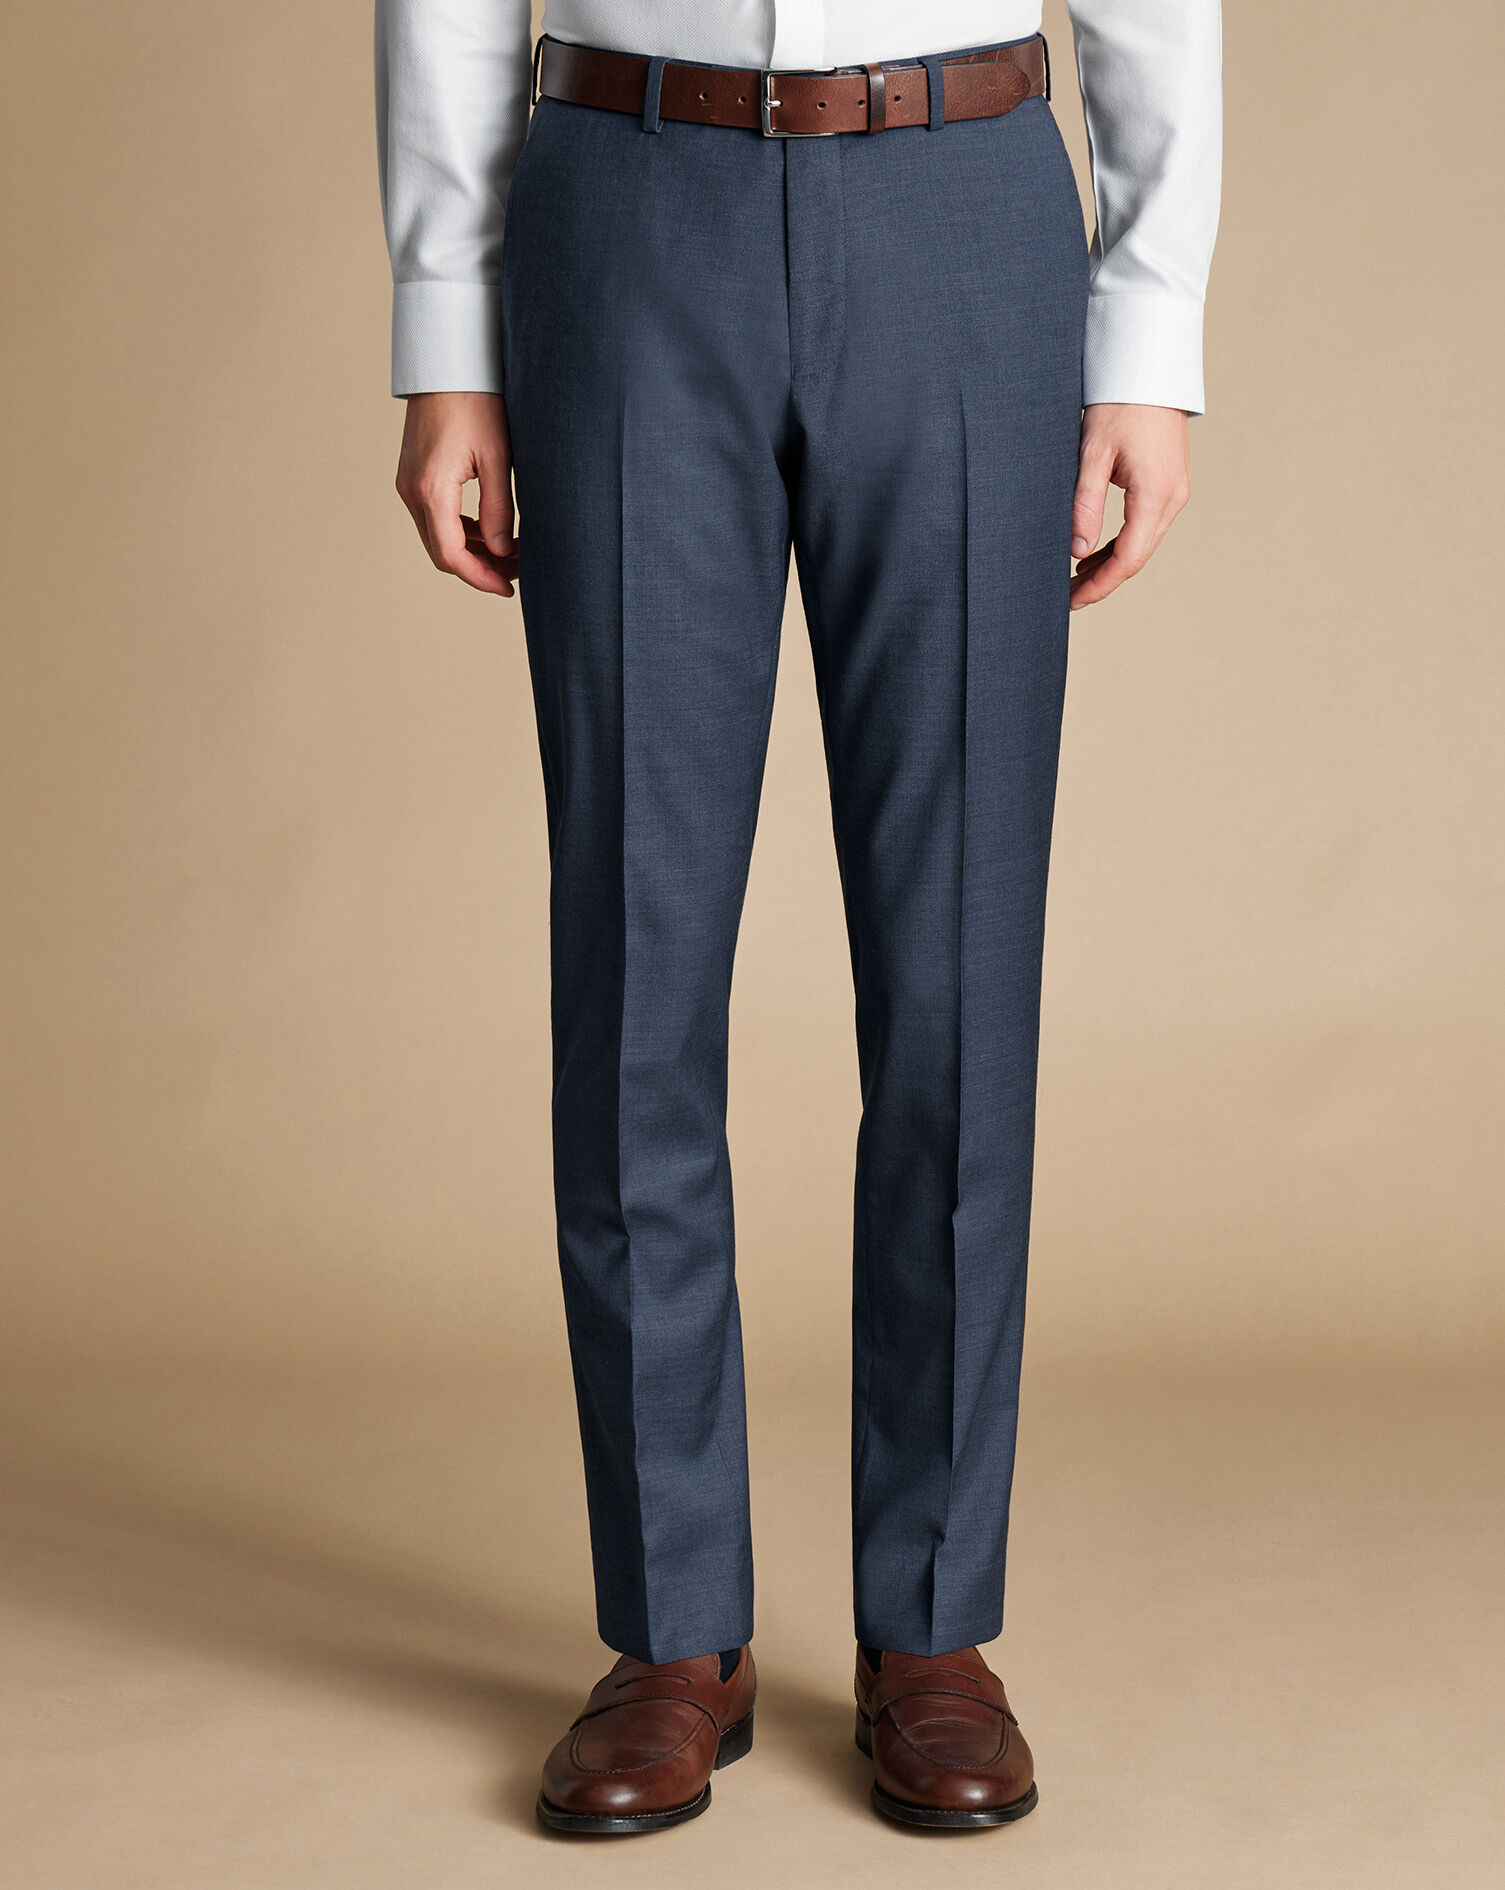 American Trousers - Buy American Trousers online in India